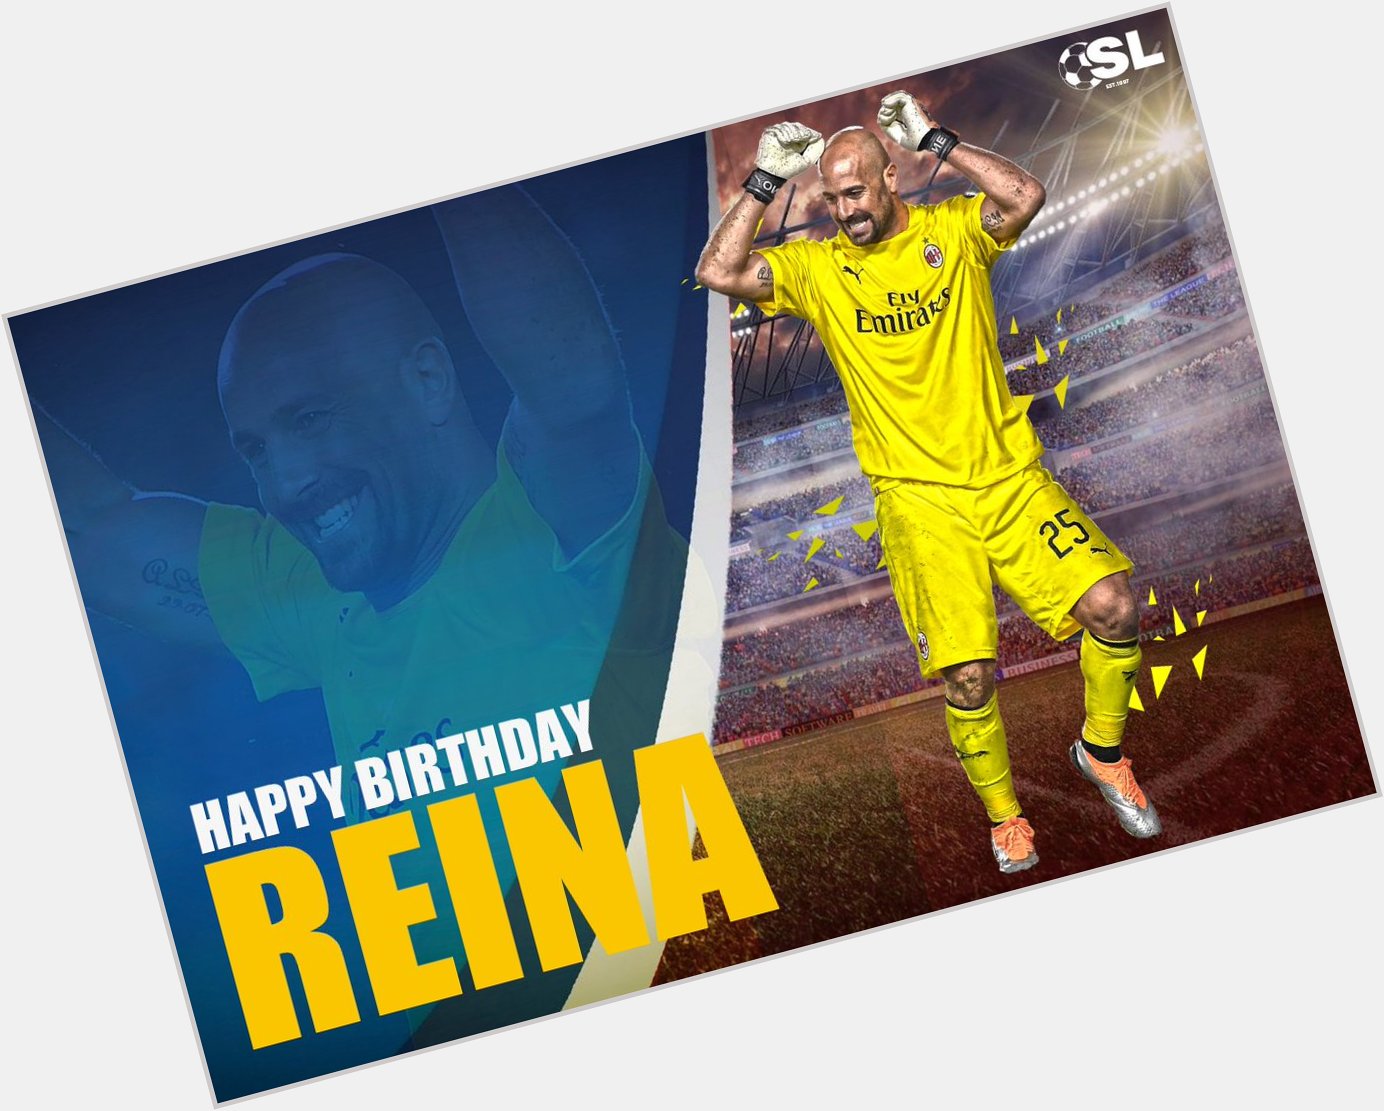 Pepe Reina is celebrating his special day today! Join us in wish the A.C Milan goalkeeper a Happy Birthday! 